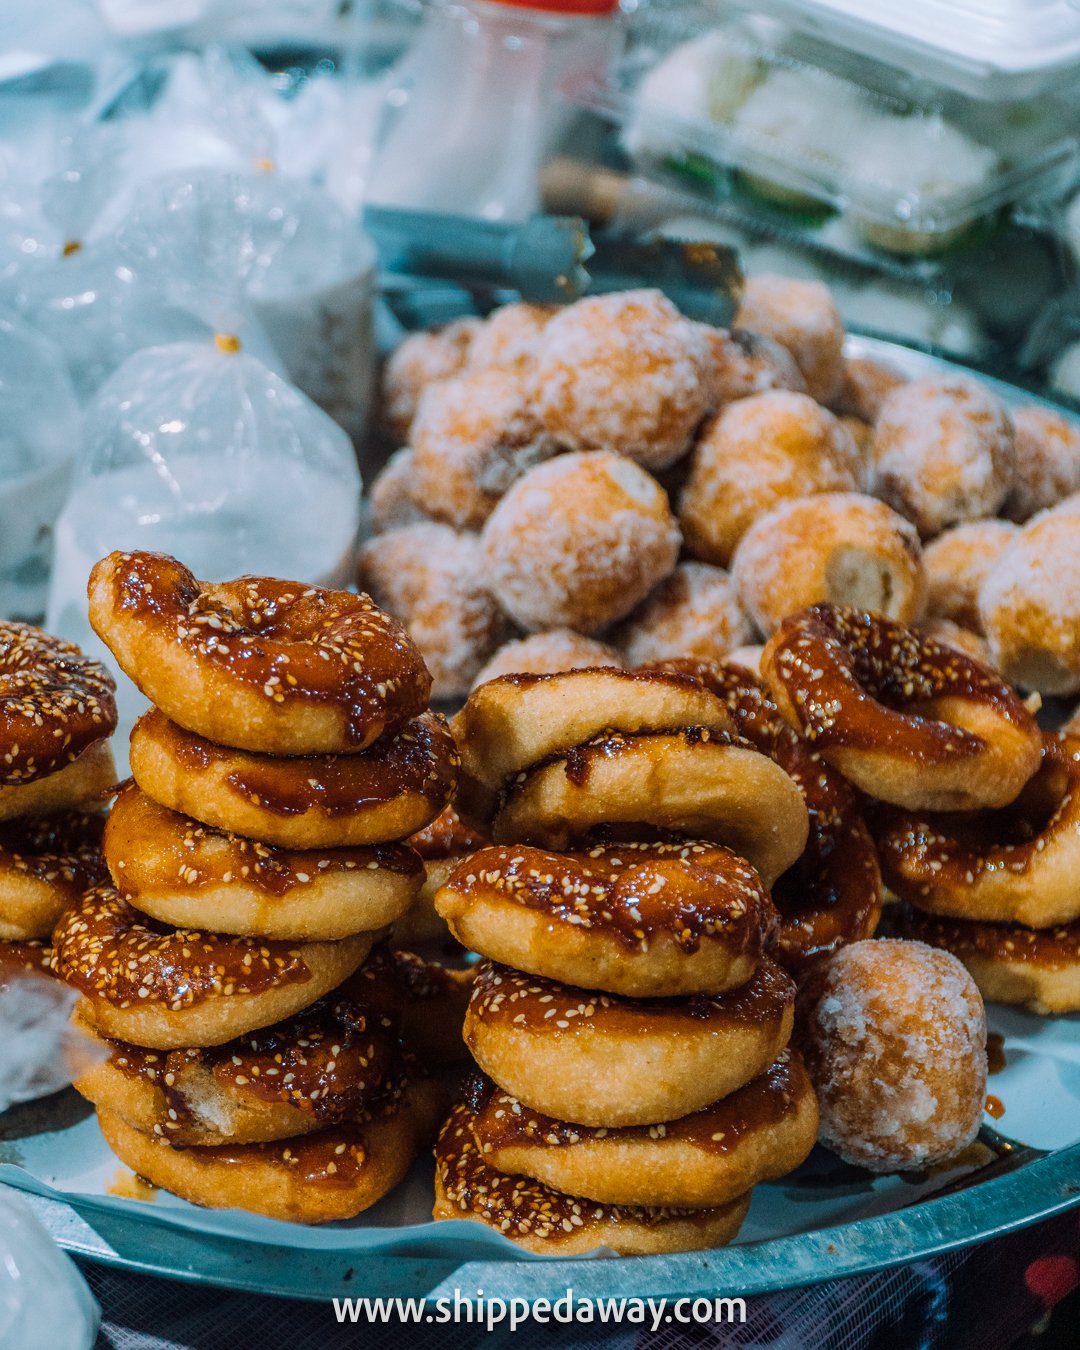 Fried doughnuts and pastries in Siem Reap, Cambodia